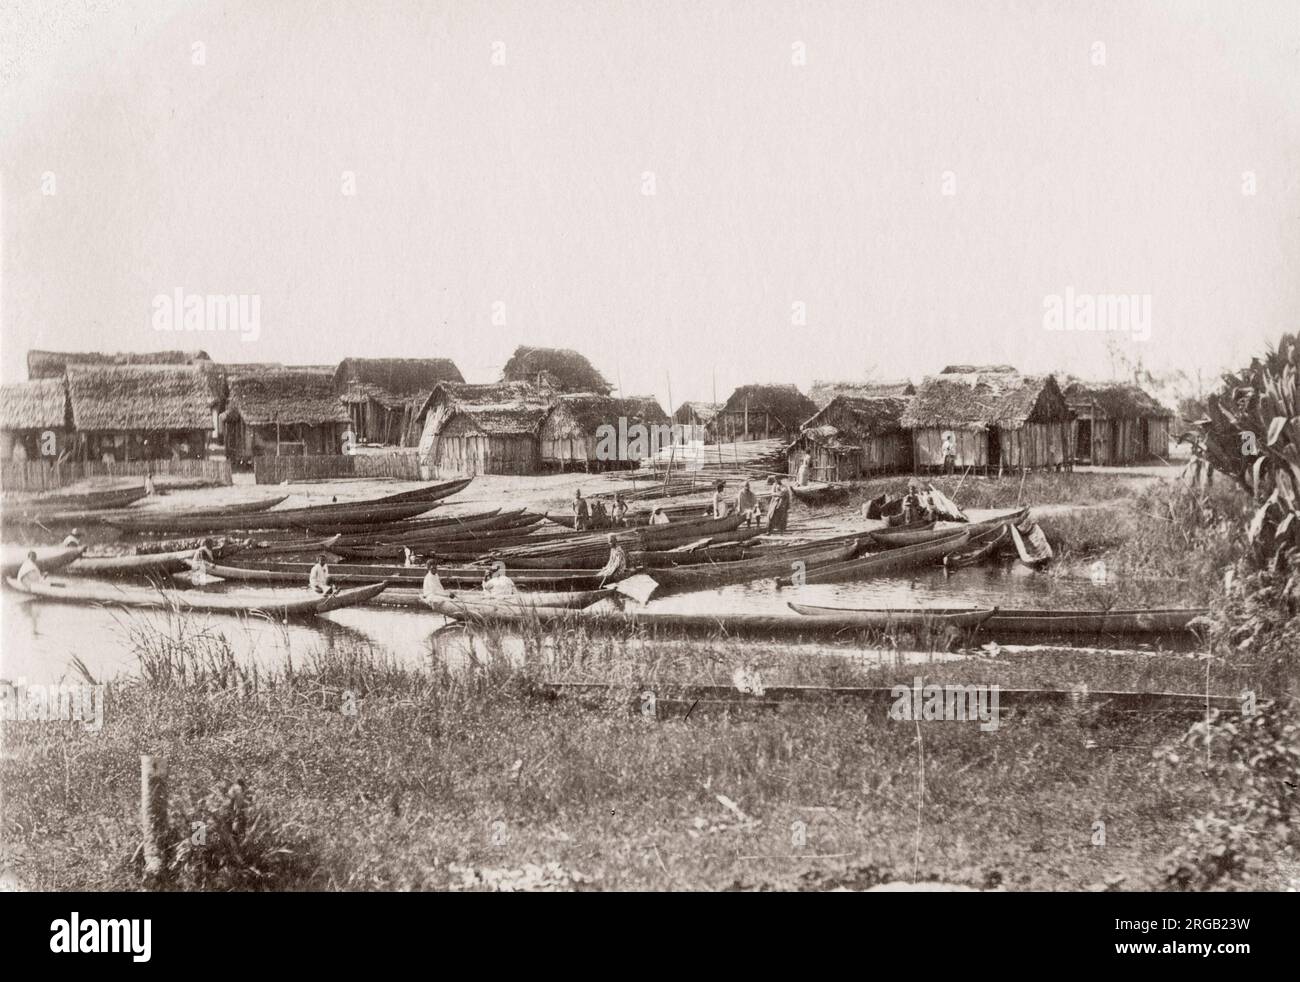 Vintage 19th century photograph: canoes and river bank at Ivondro, Madagascar. Stock Photo